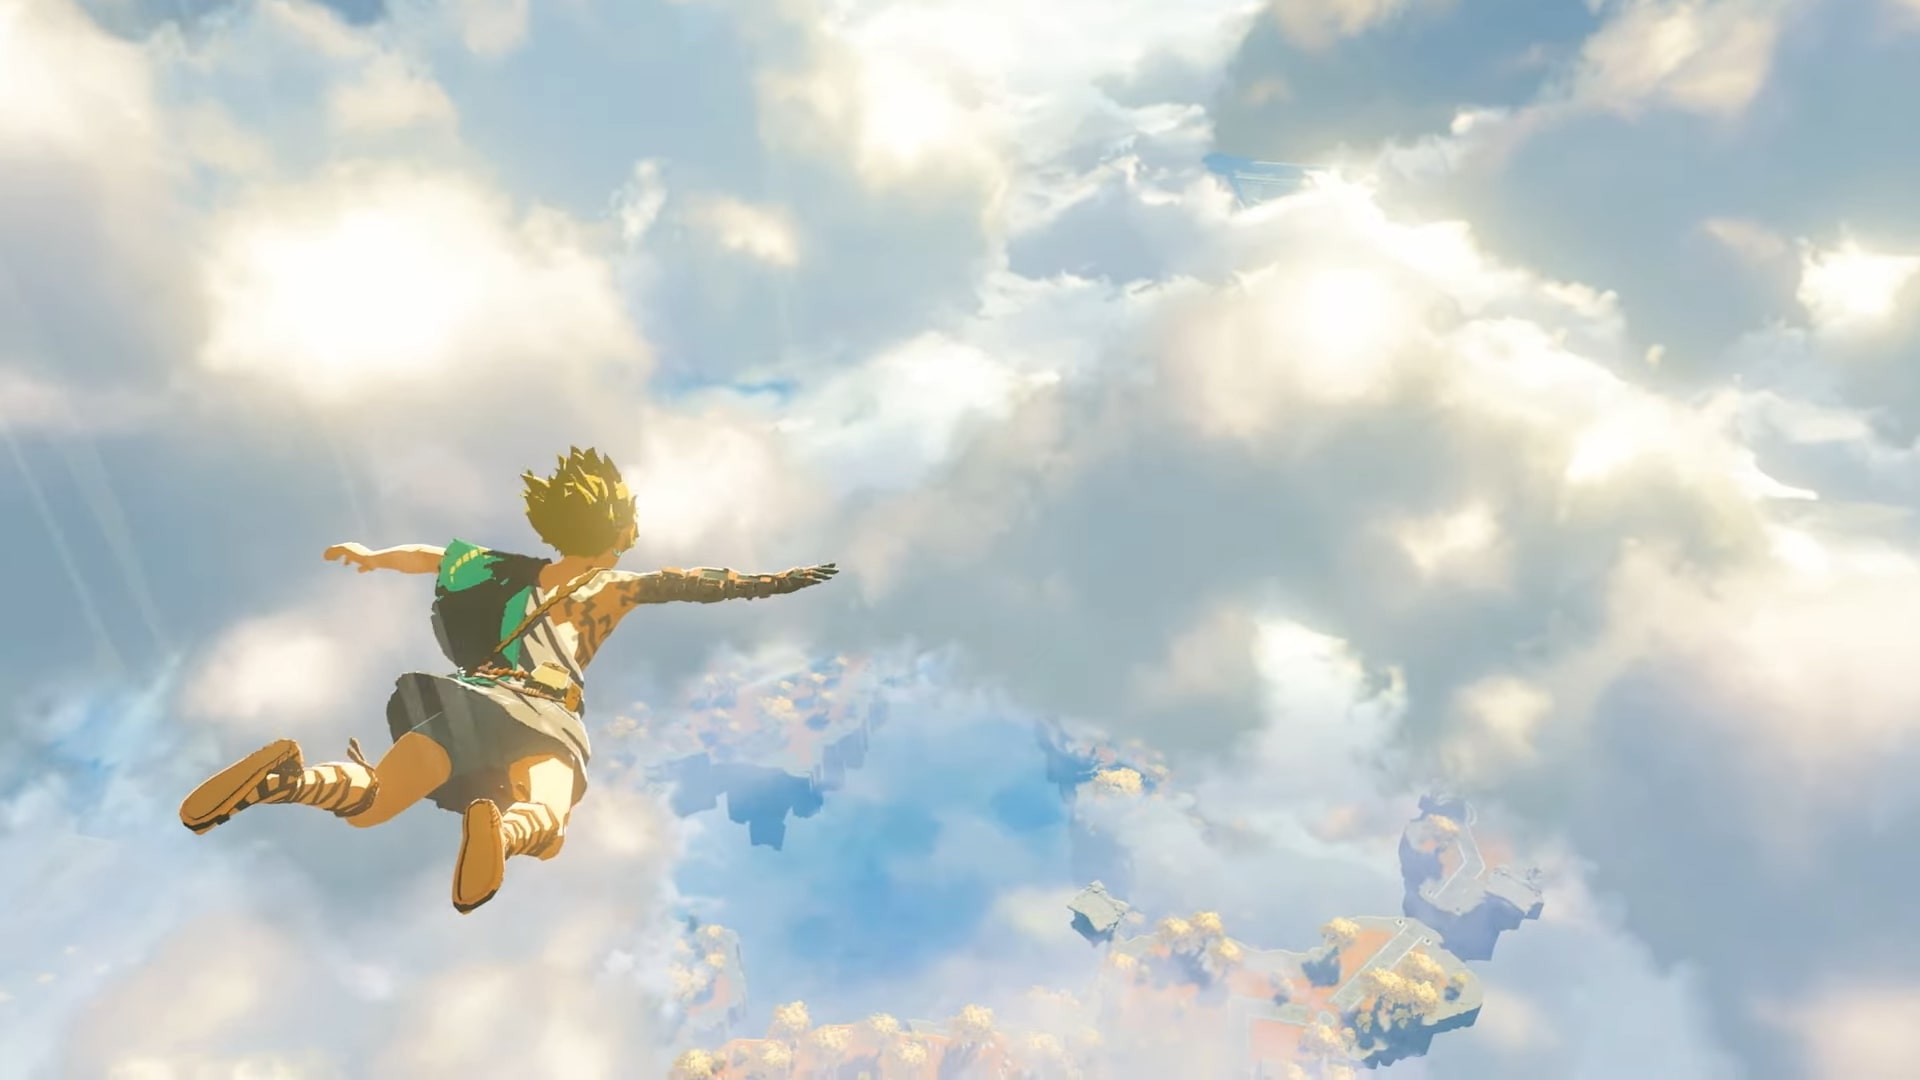 New BotW 2 Gameplay Shows Link Flying With All-New Powers